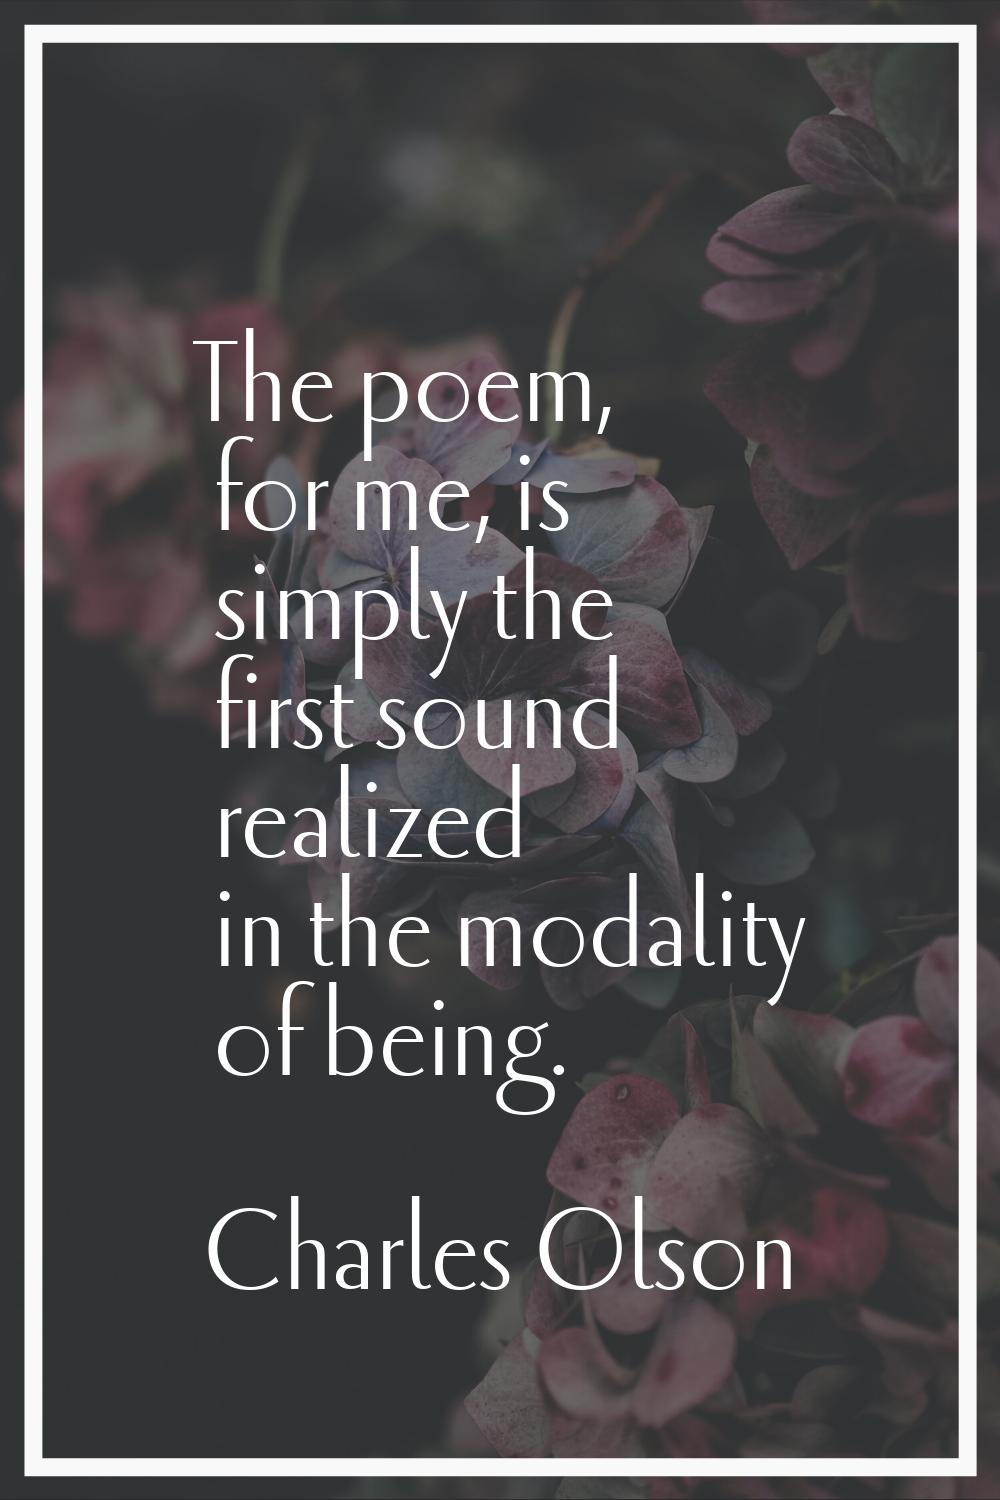 The poem, for me, is simply the first sound realized in the modality of being.